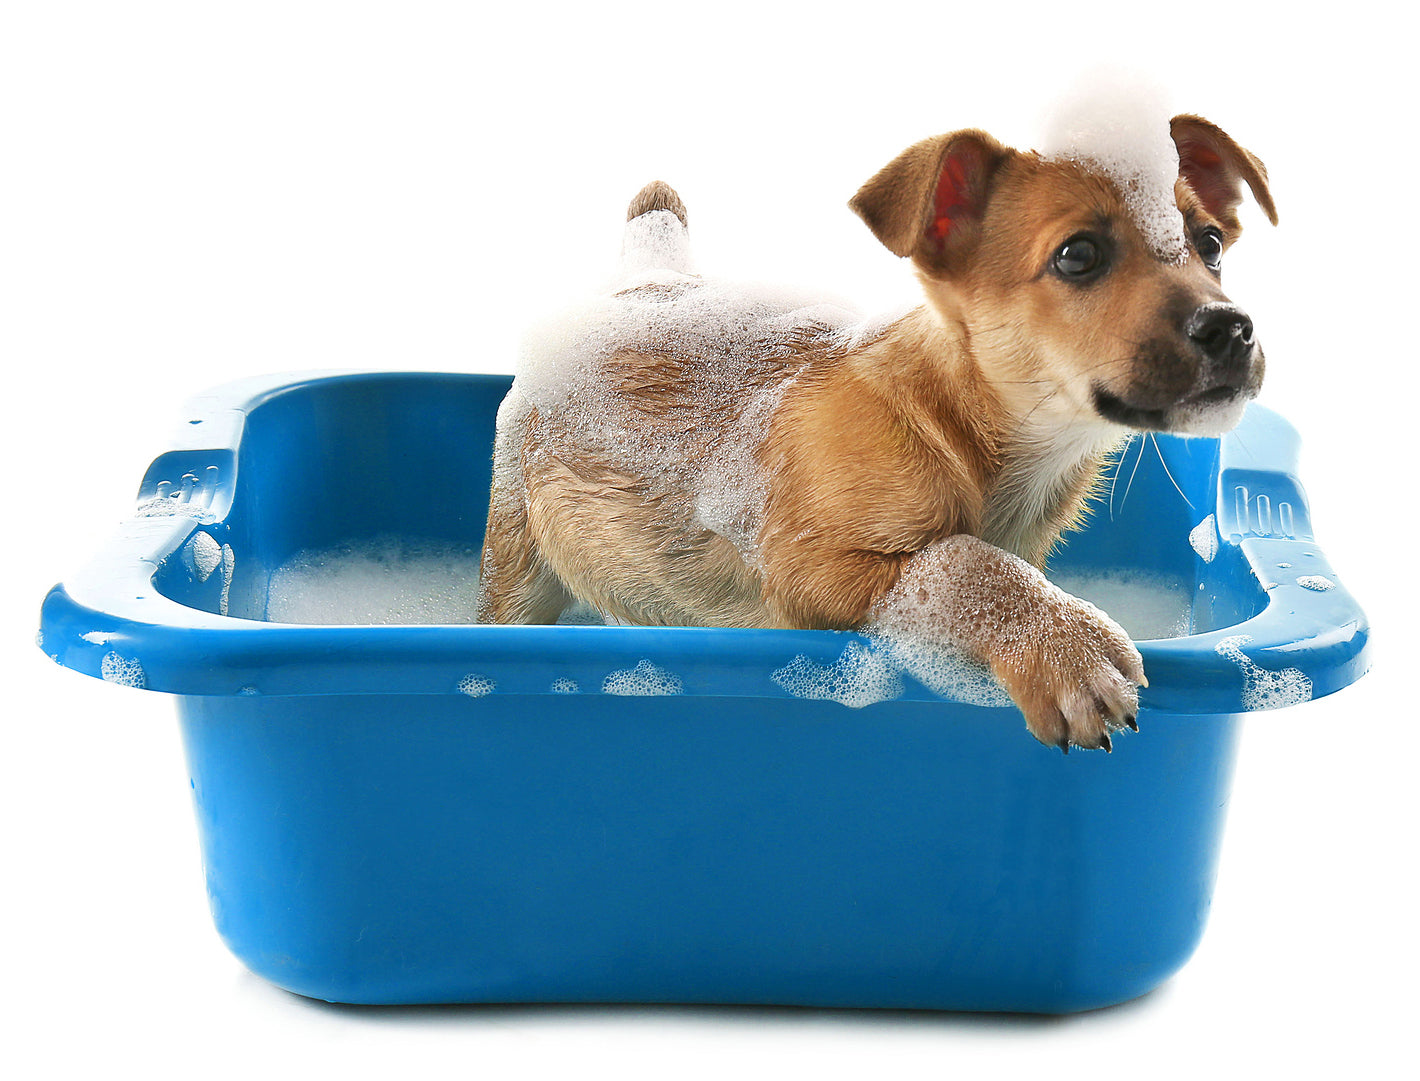 How to give dog bath at home